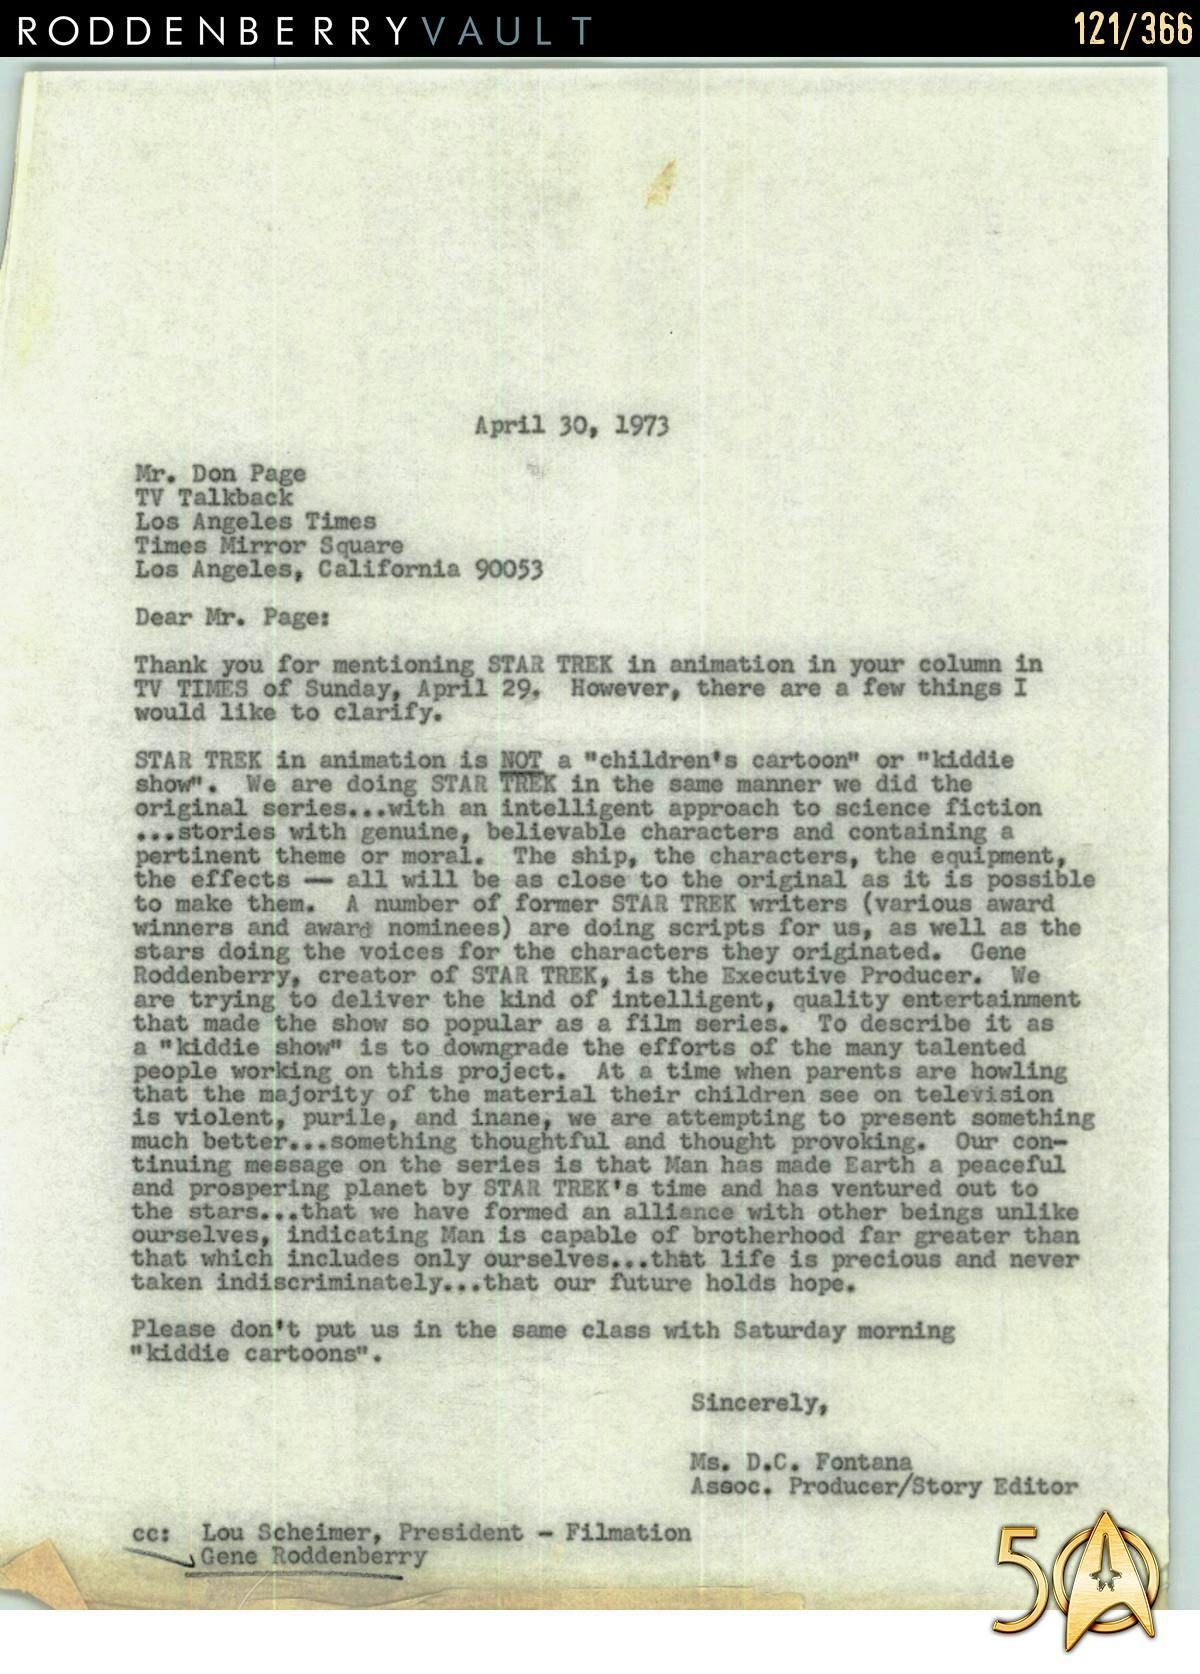 From the Roddenberry 366 Vault - The Animated Series - D.C. Fontana's correspondence letter to the LA Times about the tone of the series